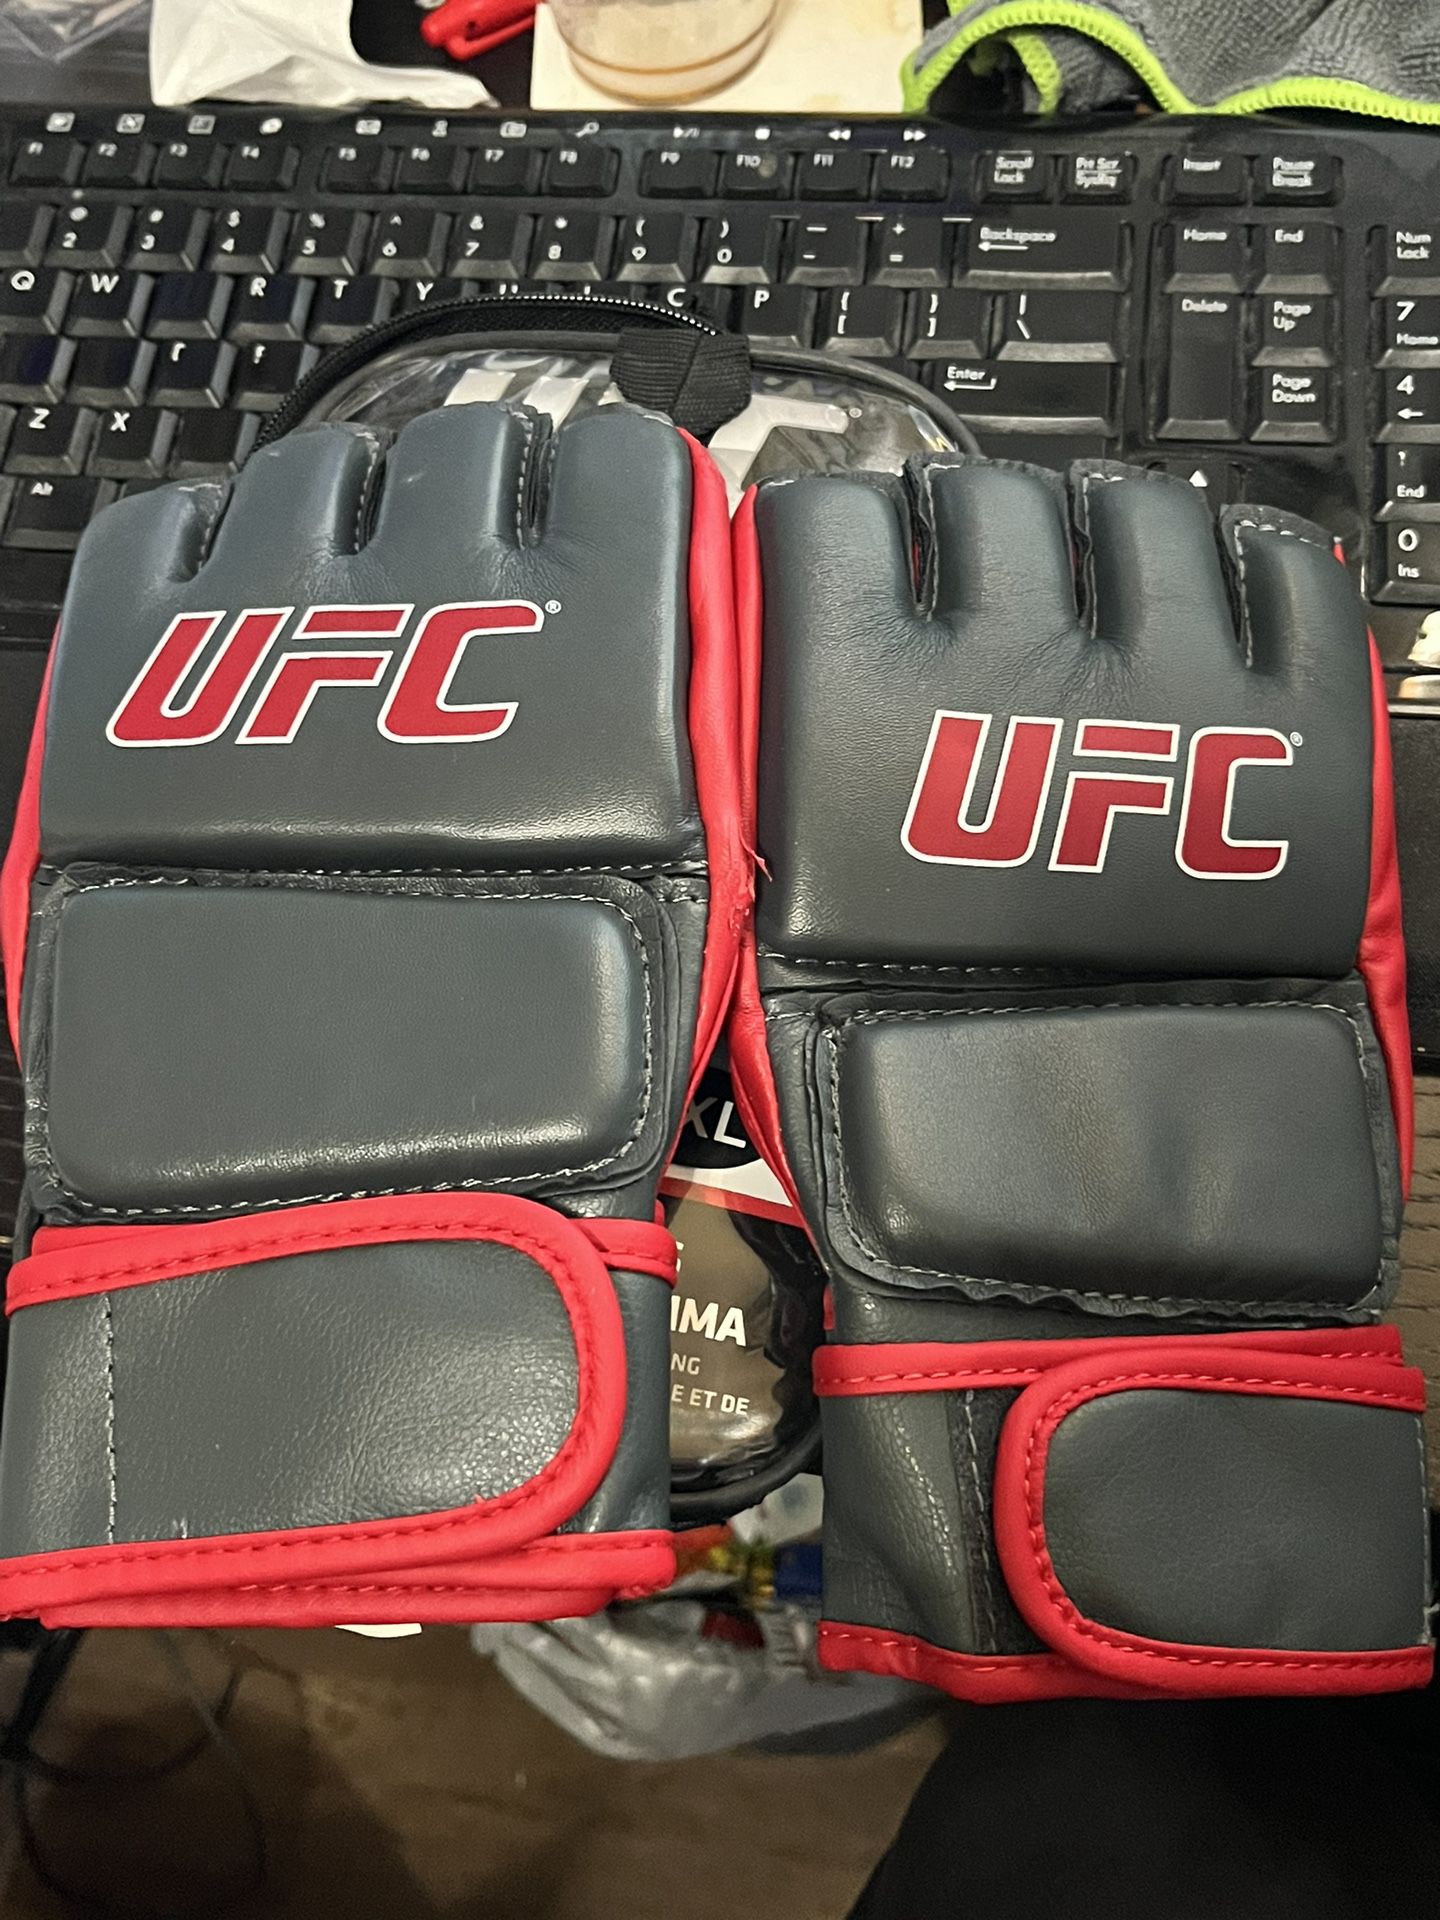 UFC MMA Training Gloves Size L/XL USED